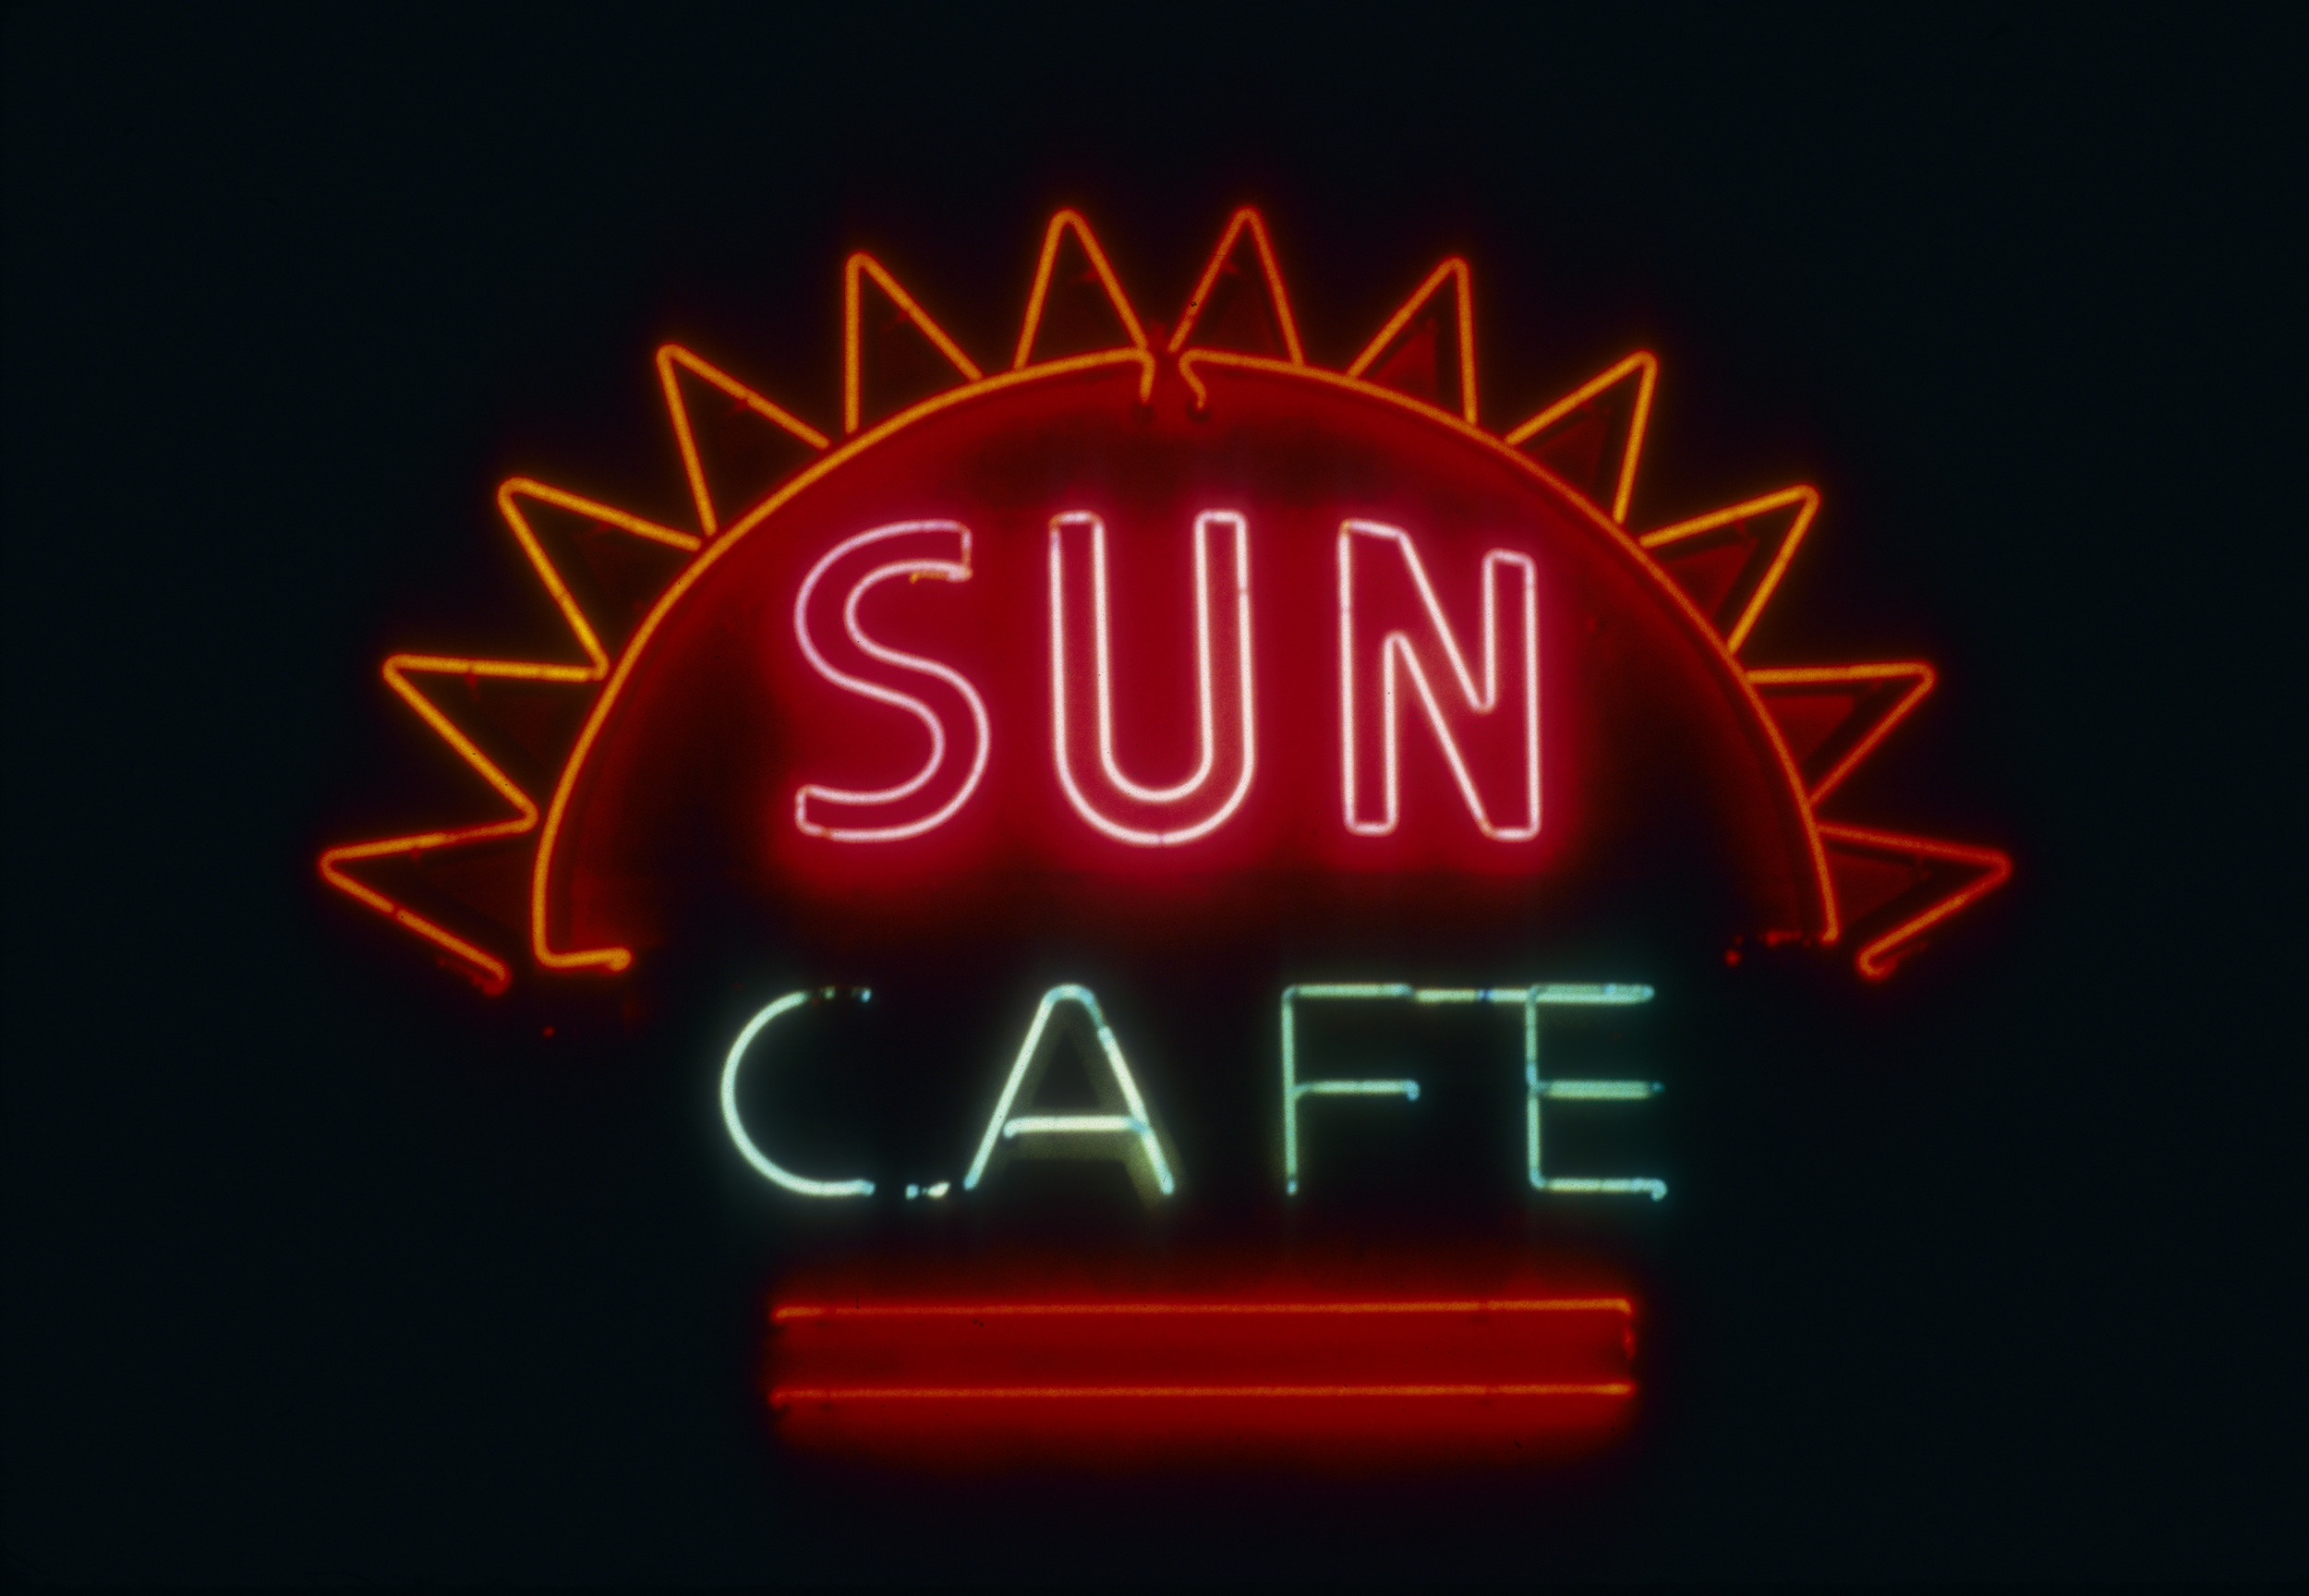 Slide of the neon sign for the Sun Cafe, Reno, Nevada, 1986